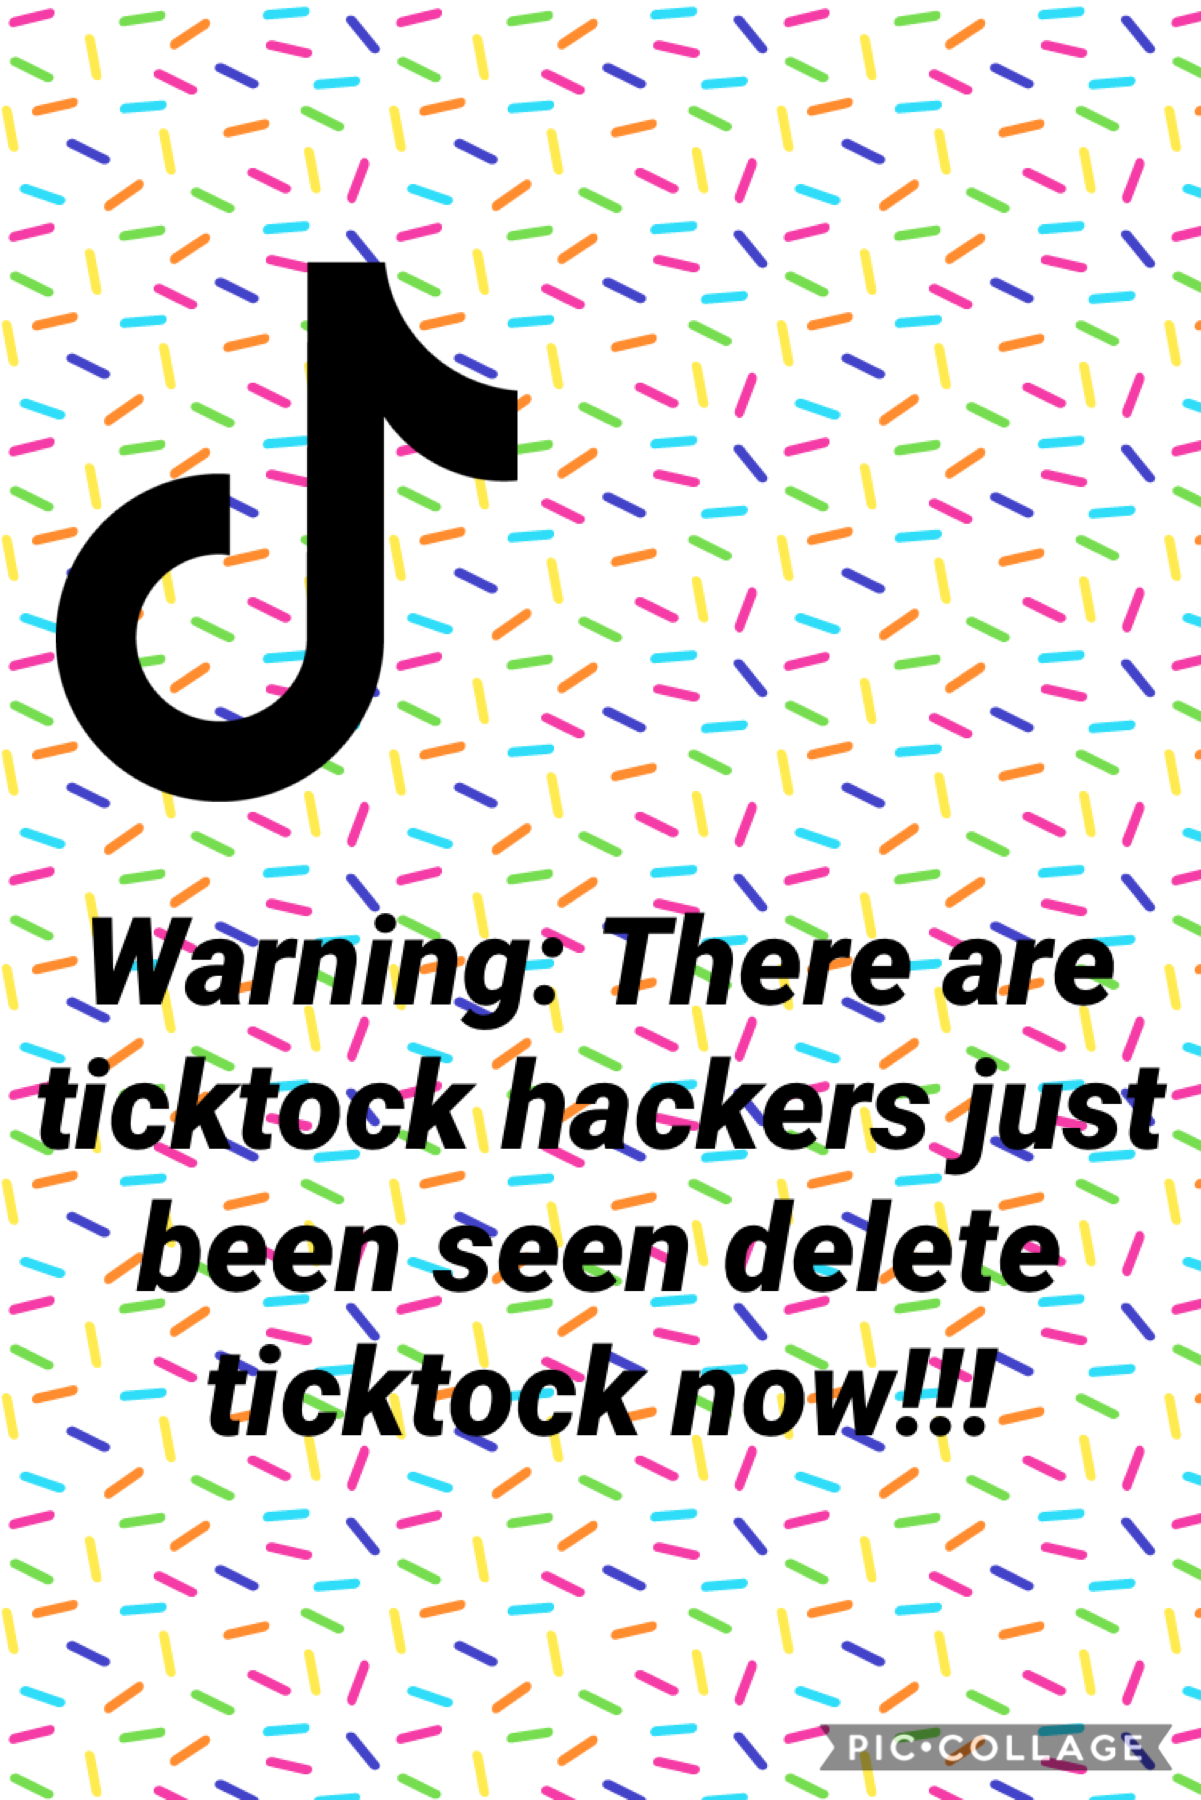 Warning: Hackers been spotted on ticktock